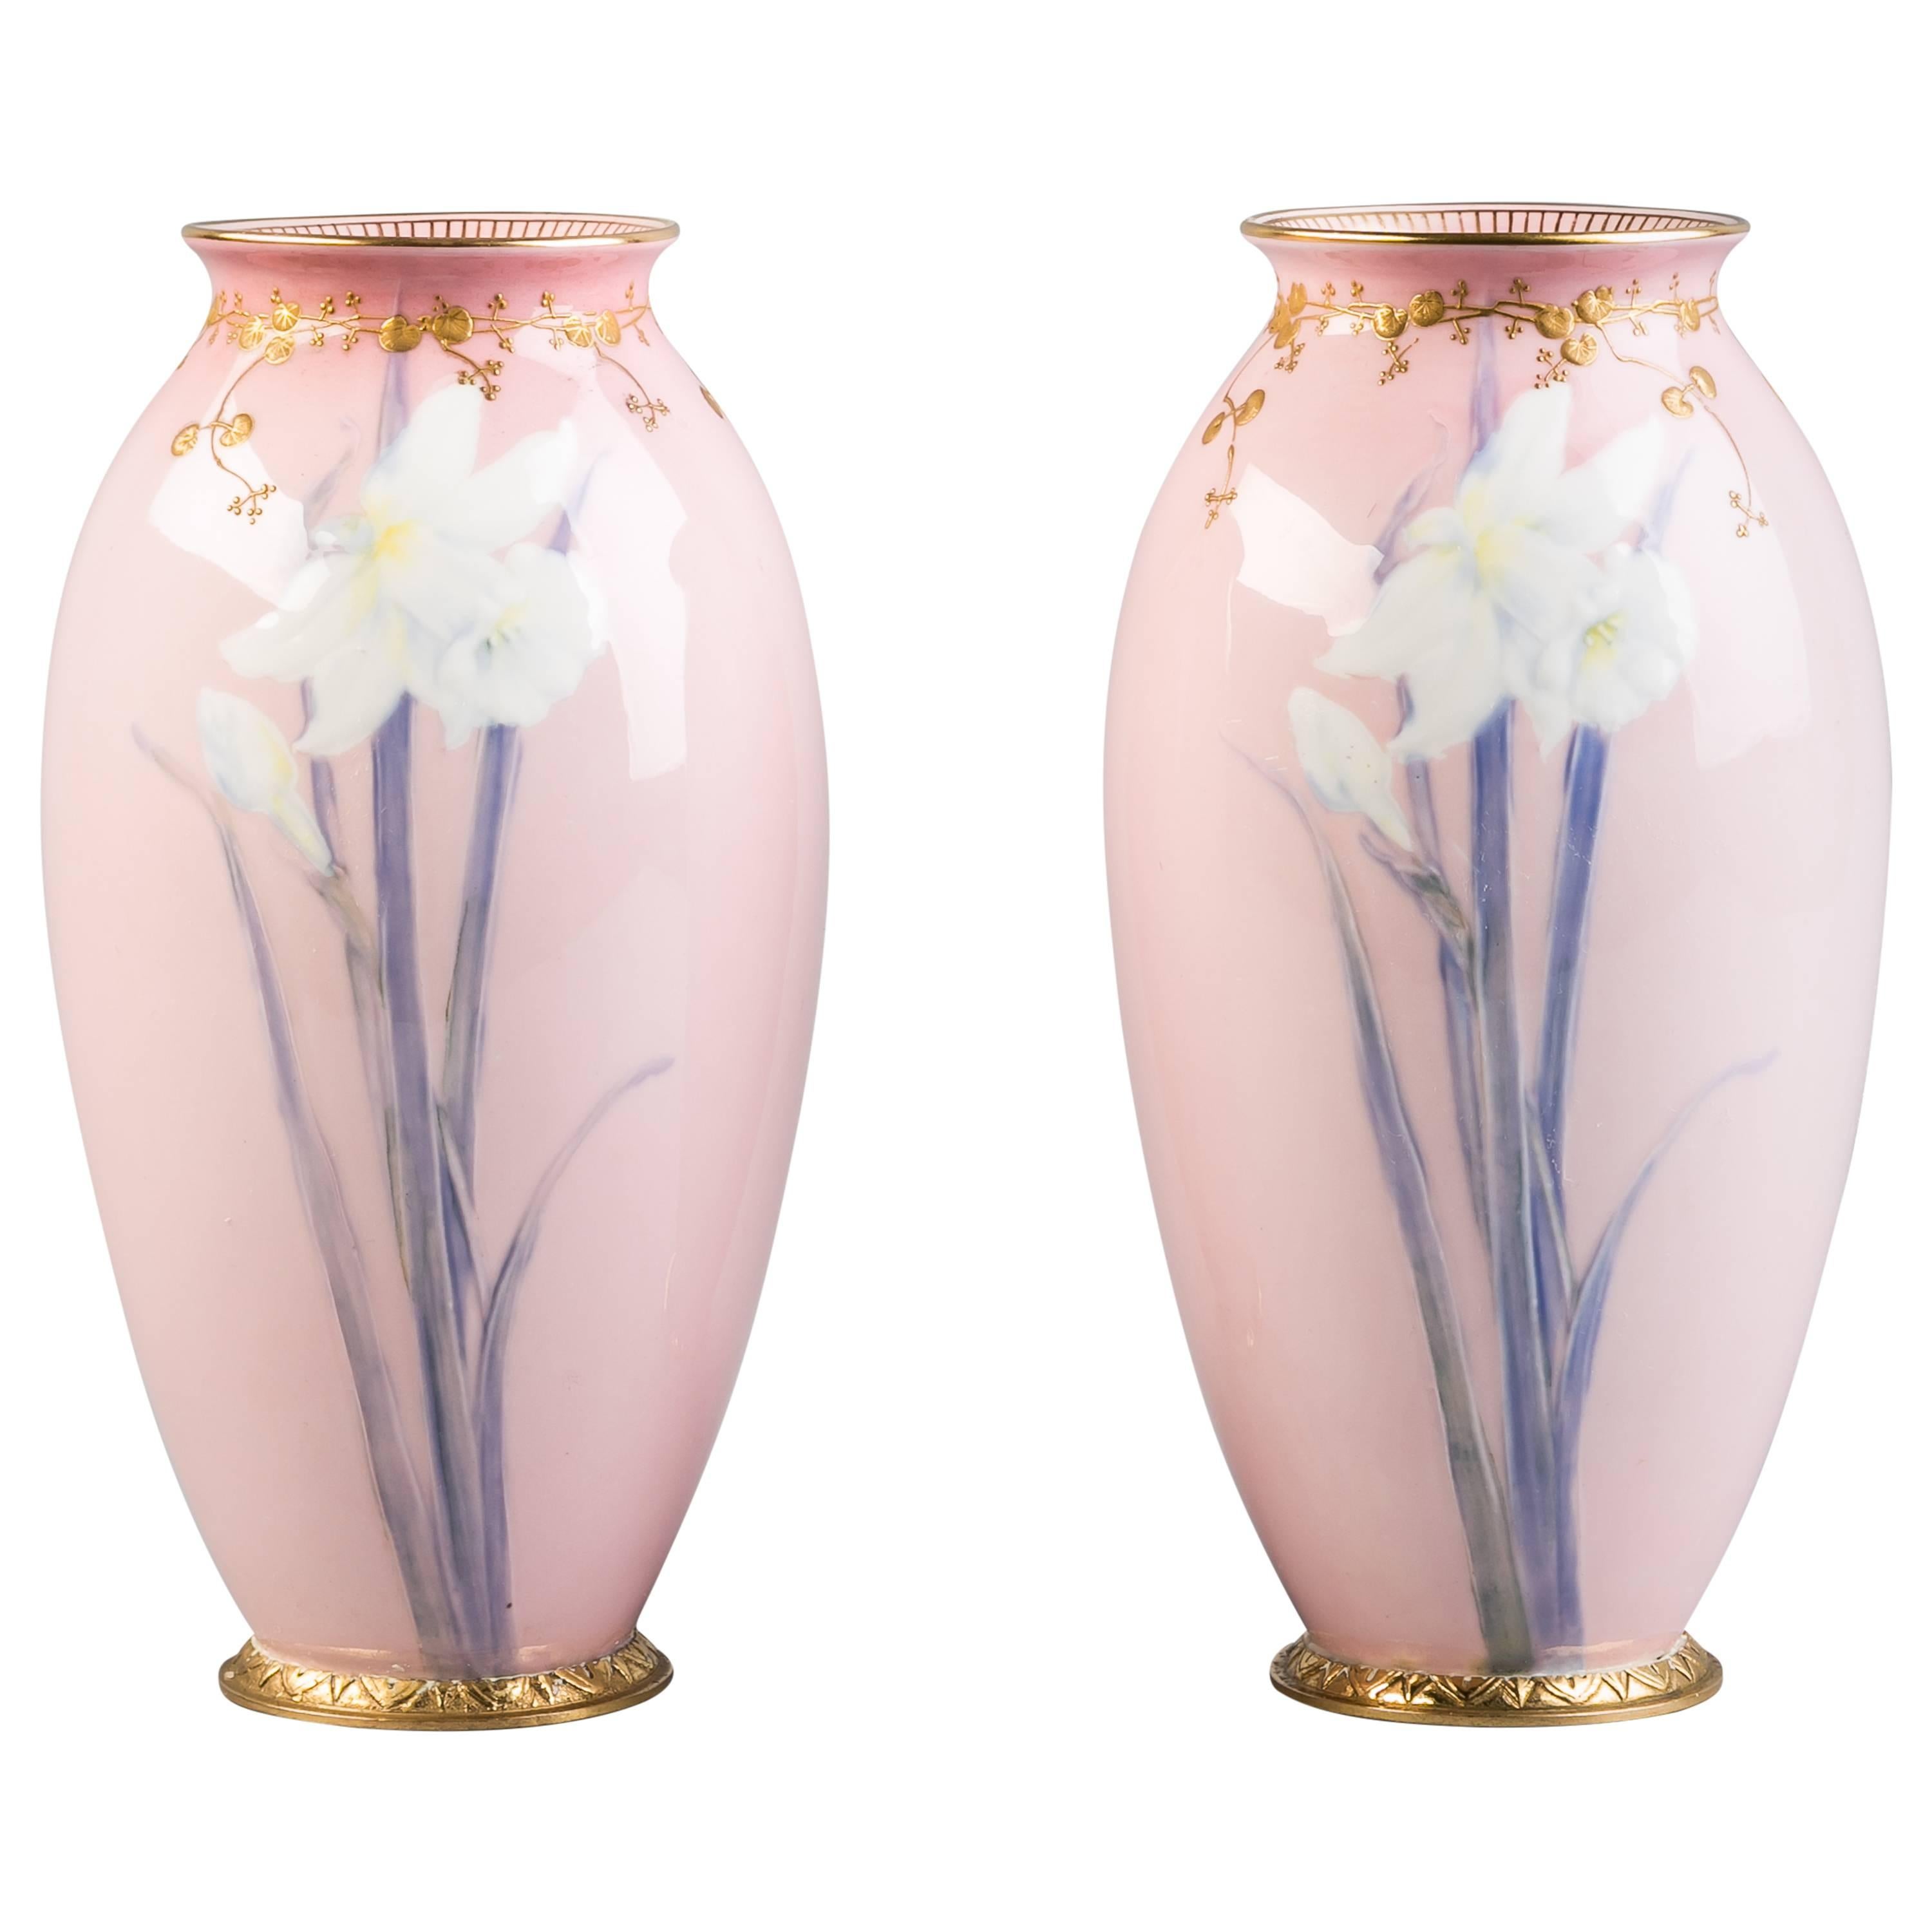 Pair of English Porcelain Gilt Bronze Mounted Pate-Sur-Pate Vases, circa 1900 For Sale